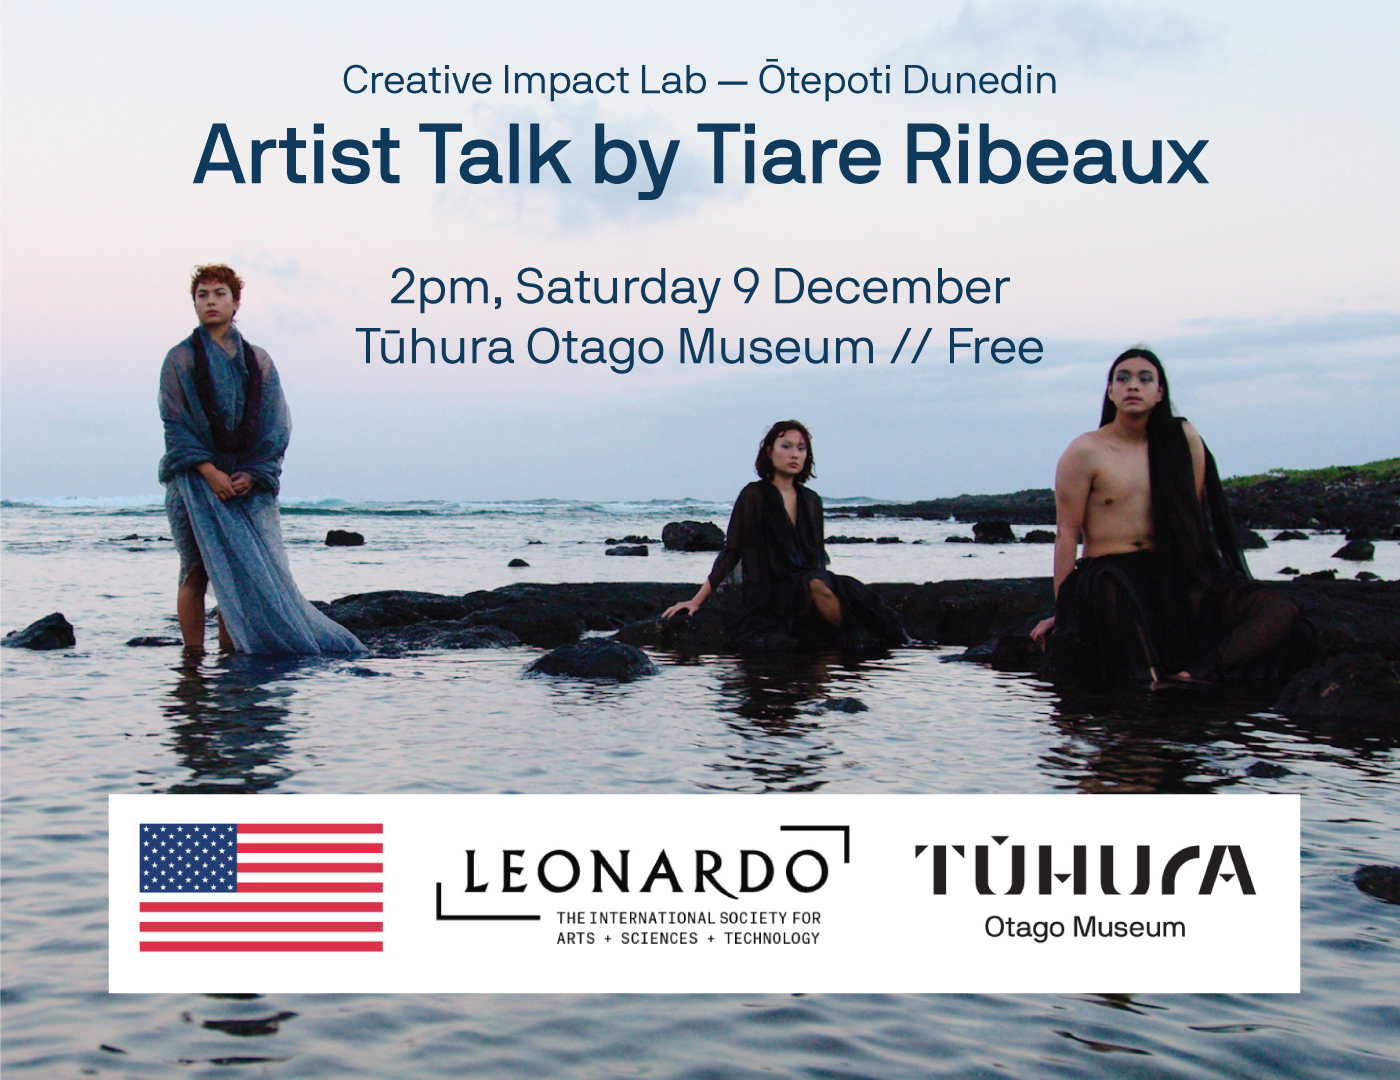 Artist talk flier with event info and U.S. Flag, Leonardo logo, and the Tūhura Otago Museum logo. The background showcases three individuals spaced evenly by the water with a sky and scattered clouds above.